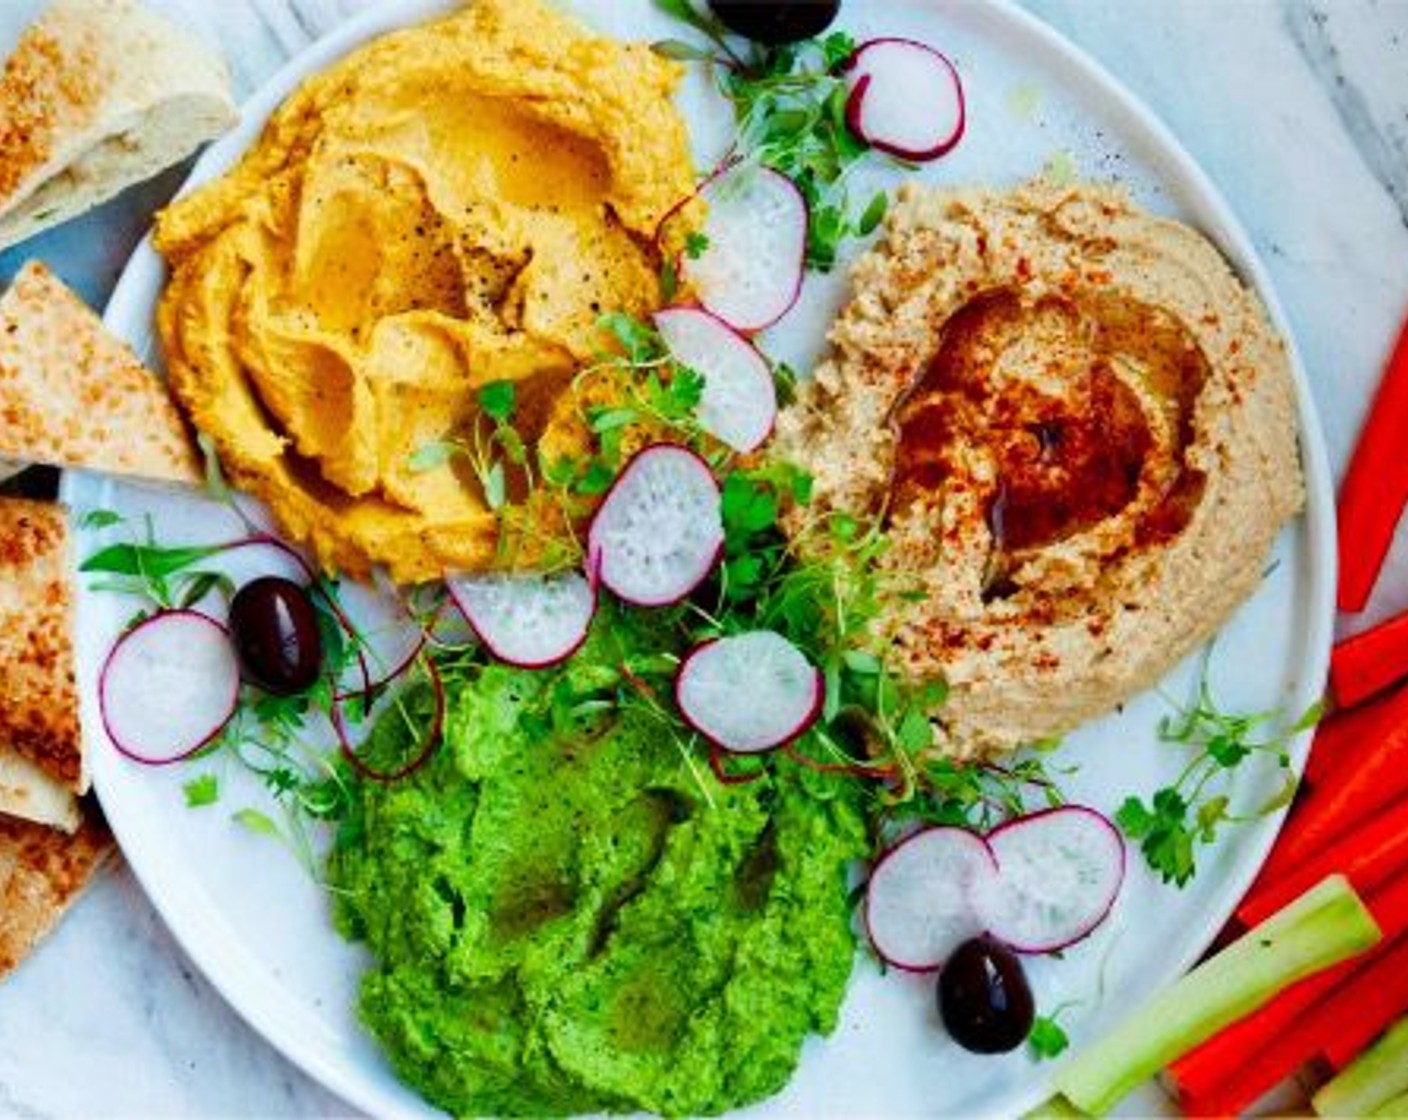 step 7 To serve, place the 3 hummus on a large plate. Drizzle all with additional extra virgin olive oil, then sprinkle some extra chili on the traditional one, and ground black pepper on the kale and pumpkin ones. Serve with veggie sticks and pita bread. Enjoy!